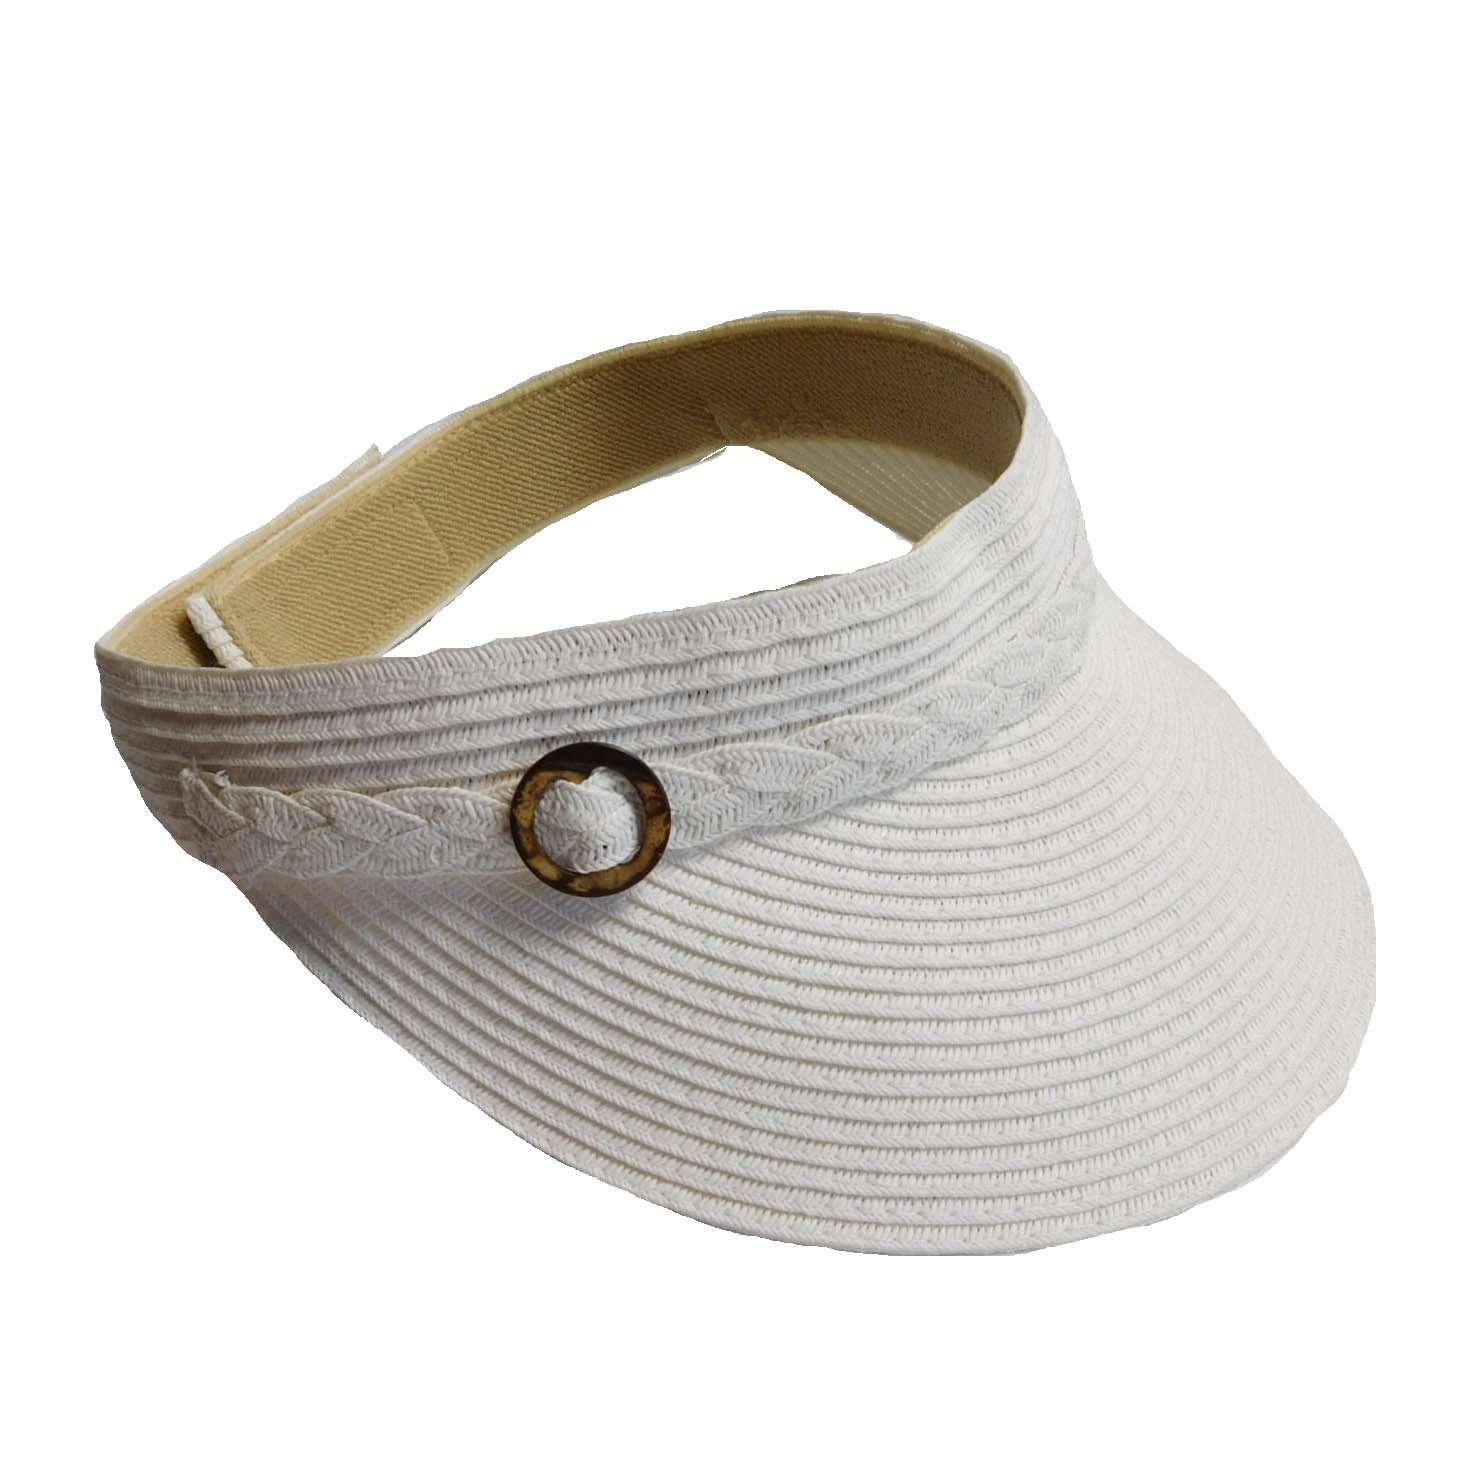 Straw Visor with Buckle Accent Visor Cap Boardwalk Style Hats WSPS656WH White  